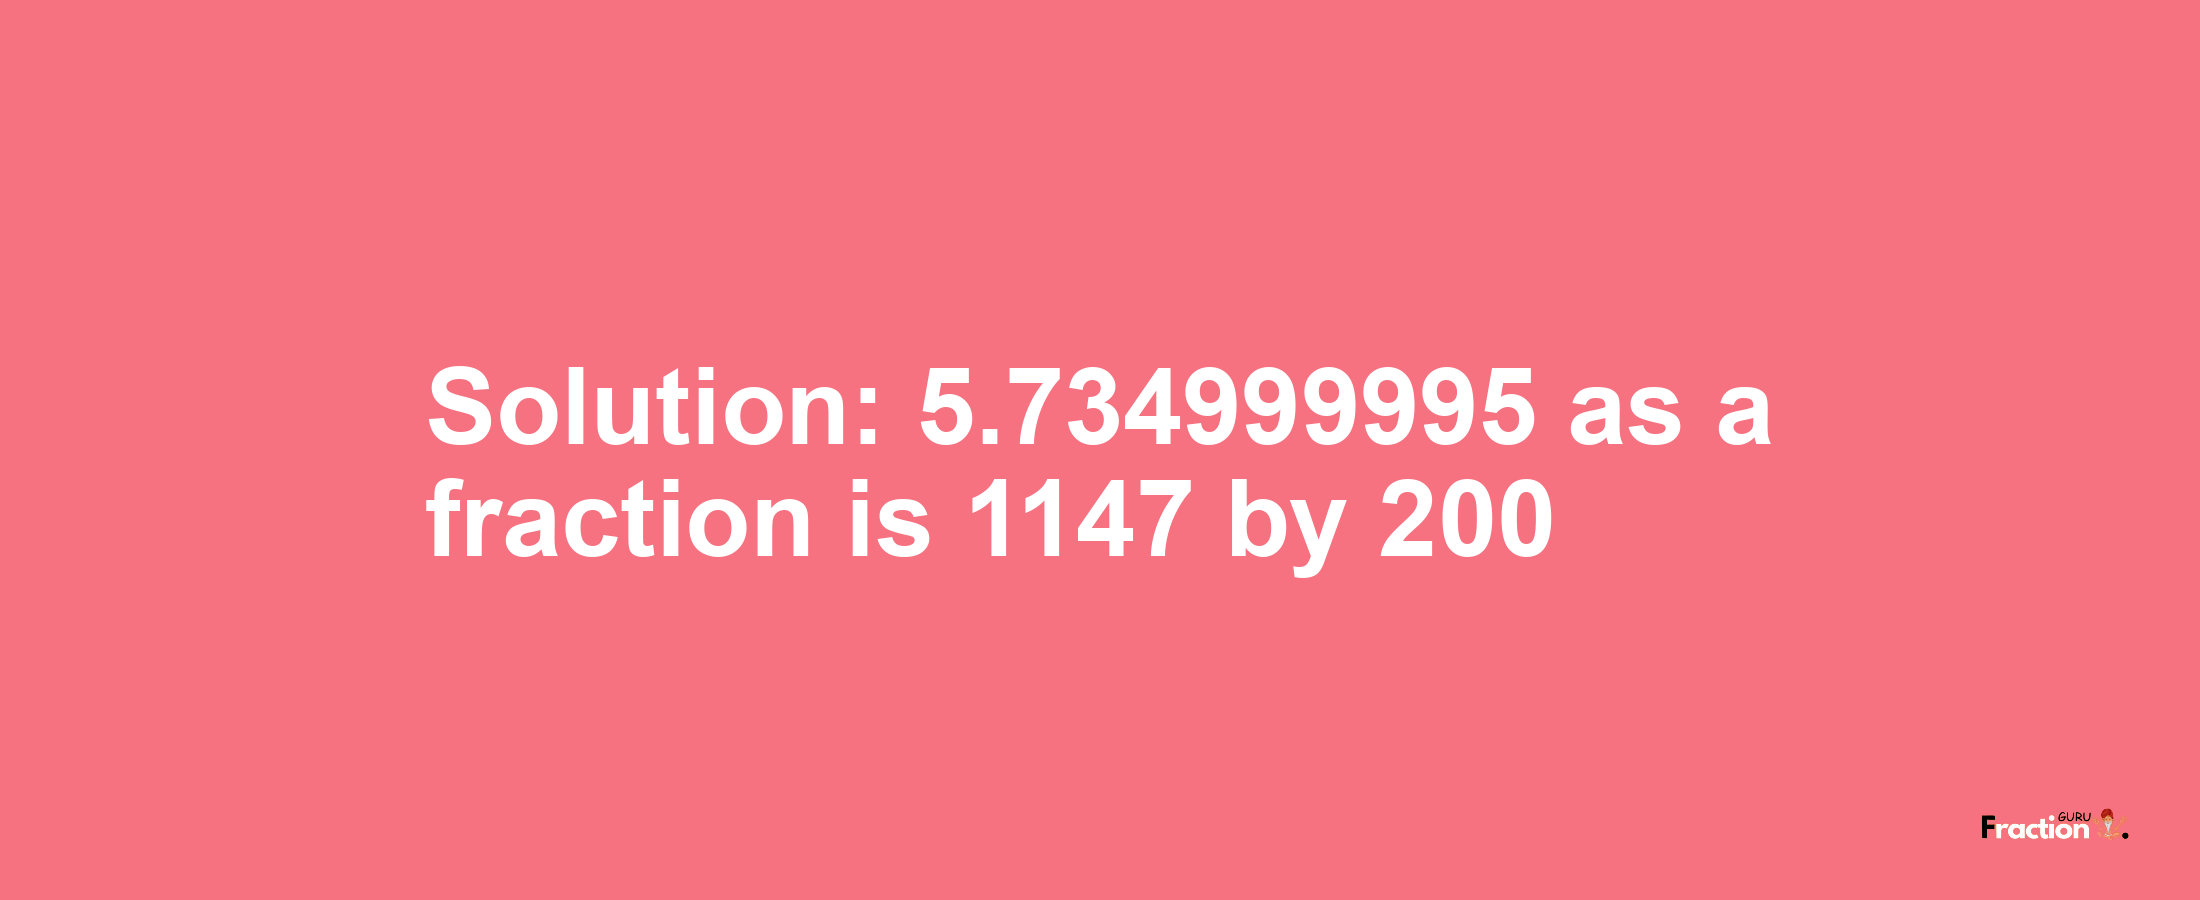 Solution:5.734999995 as a fraction is 1147/200